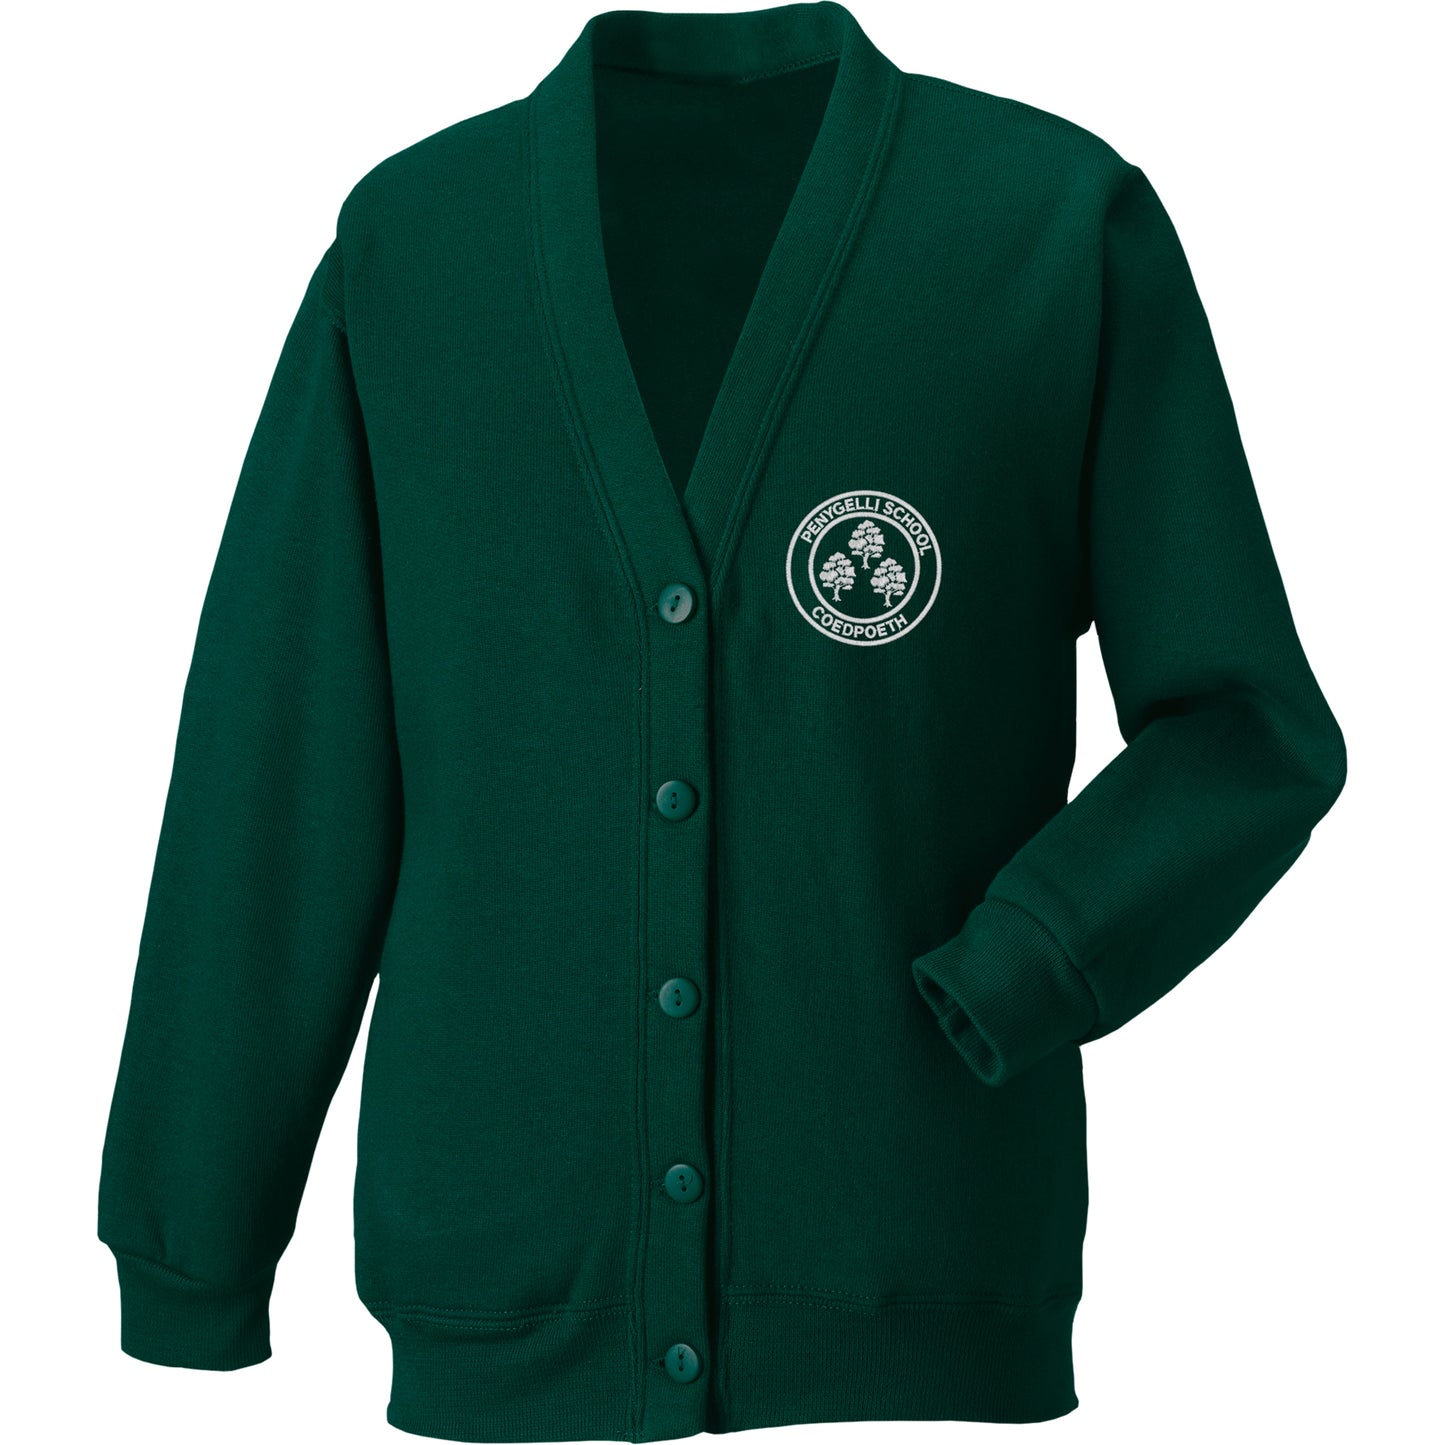 Ysgol Penygelli Cardigans are supplied by ourschoolwear of Wrexhamf Wrexham